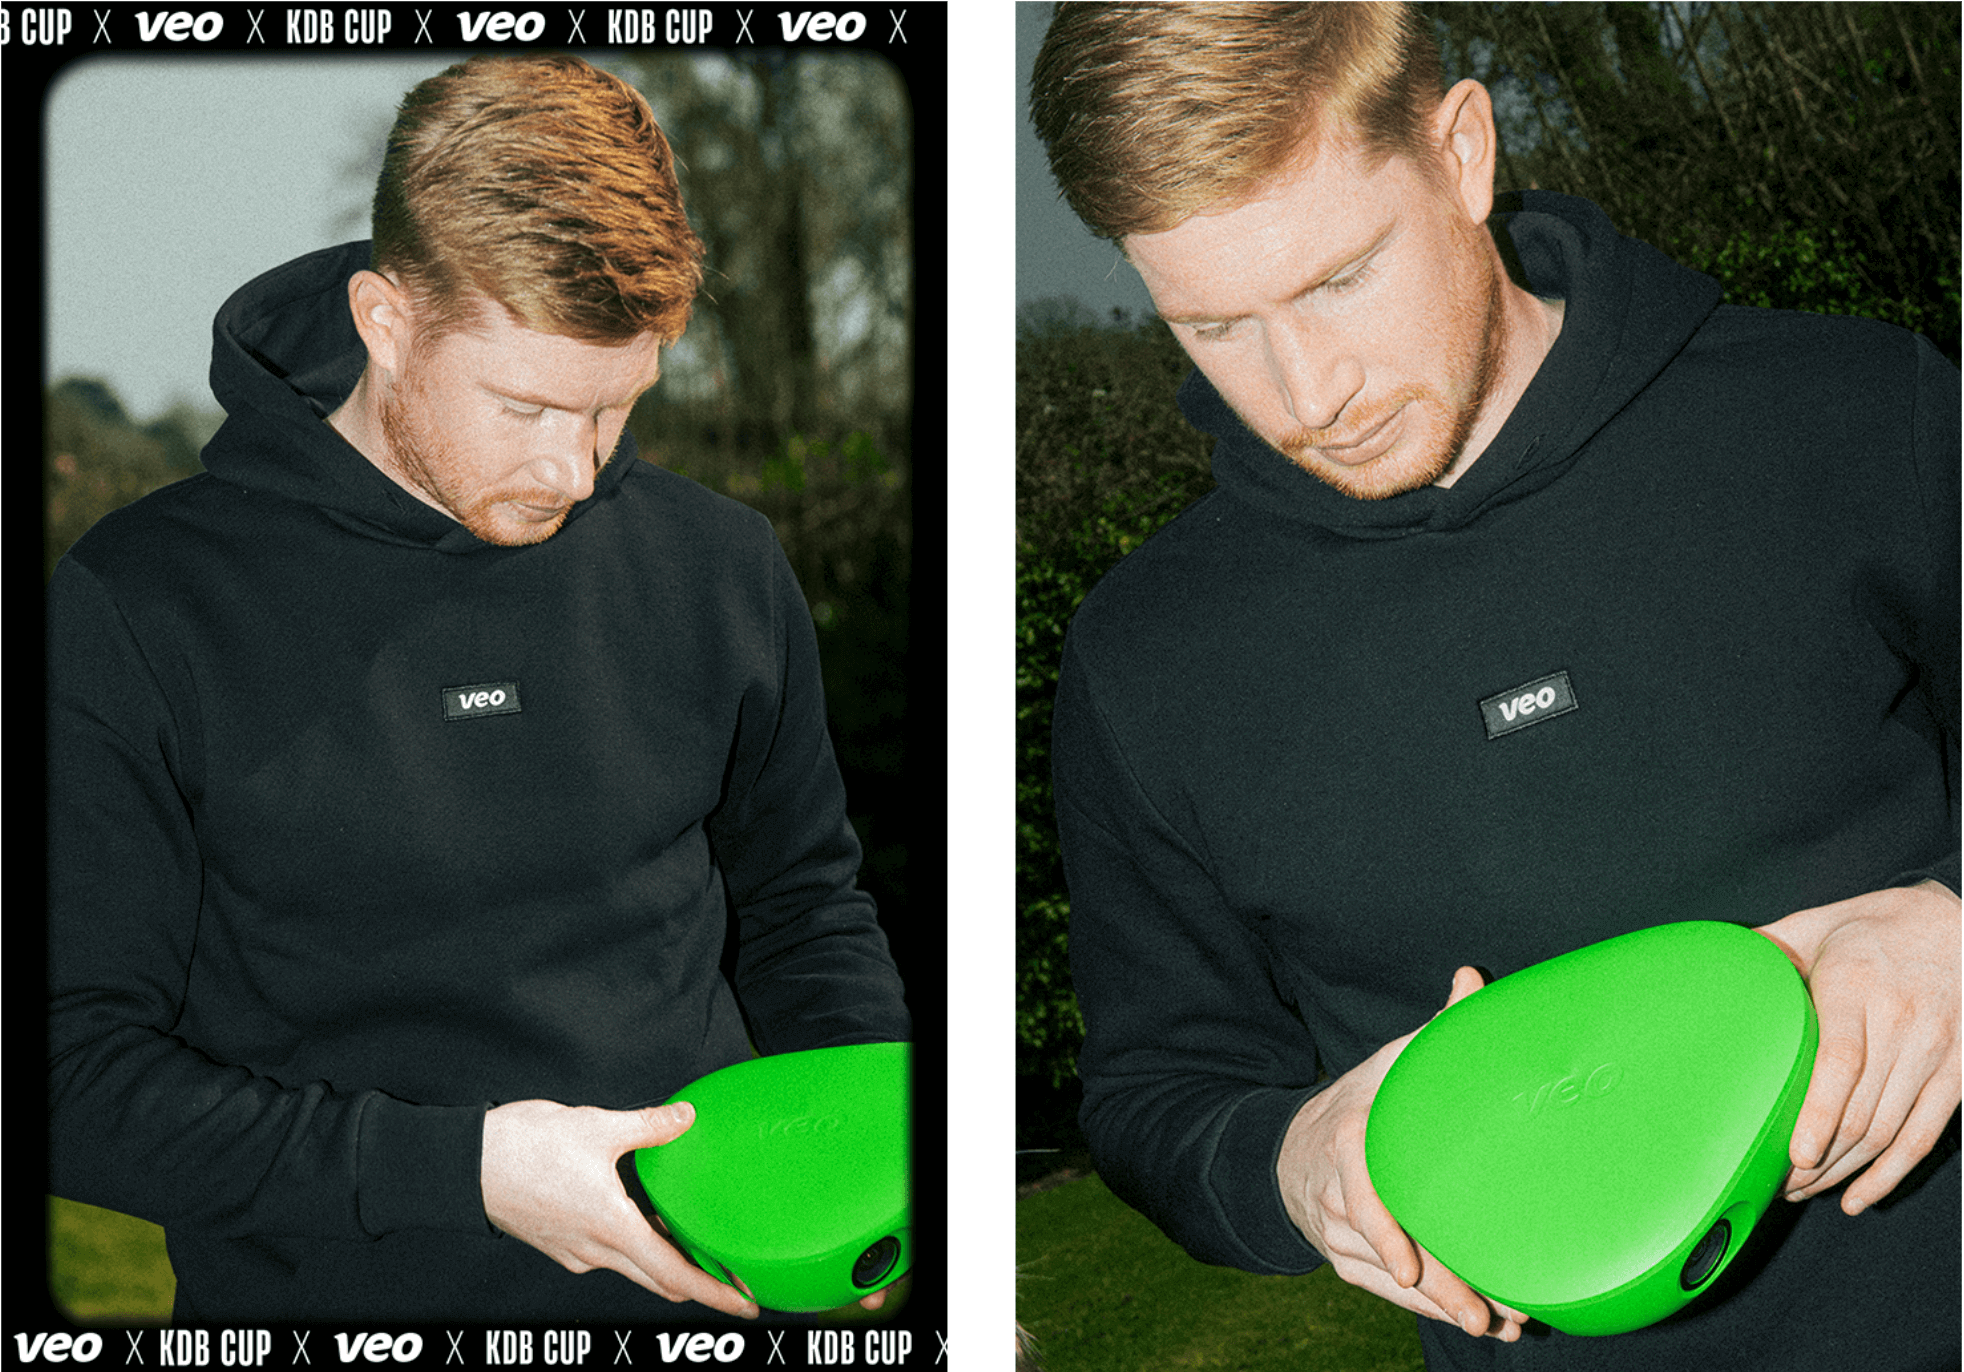 Kevin de Bruyne is seen looking around while holding the Veo soccer camera. He is dressed in sportswear and has a cheerful expression on his face.